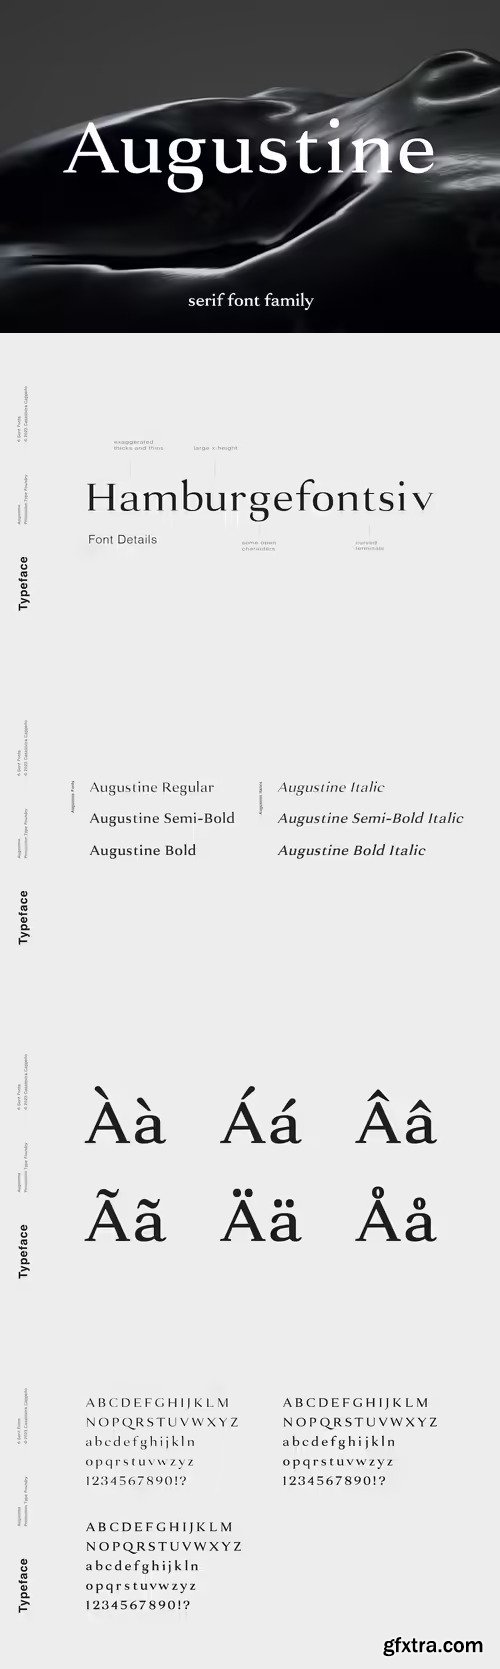 Augustine - A Strong Serif Typeface